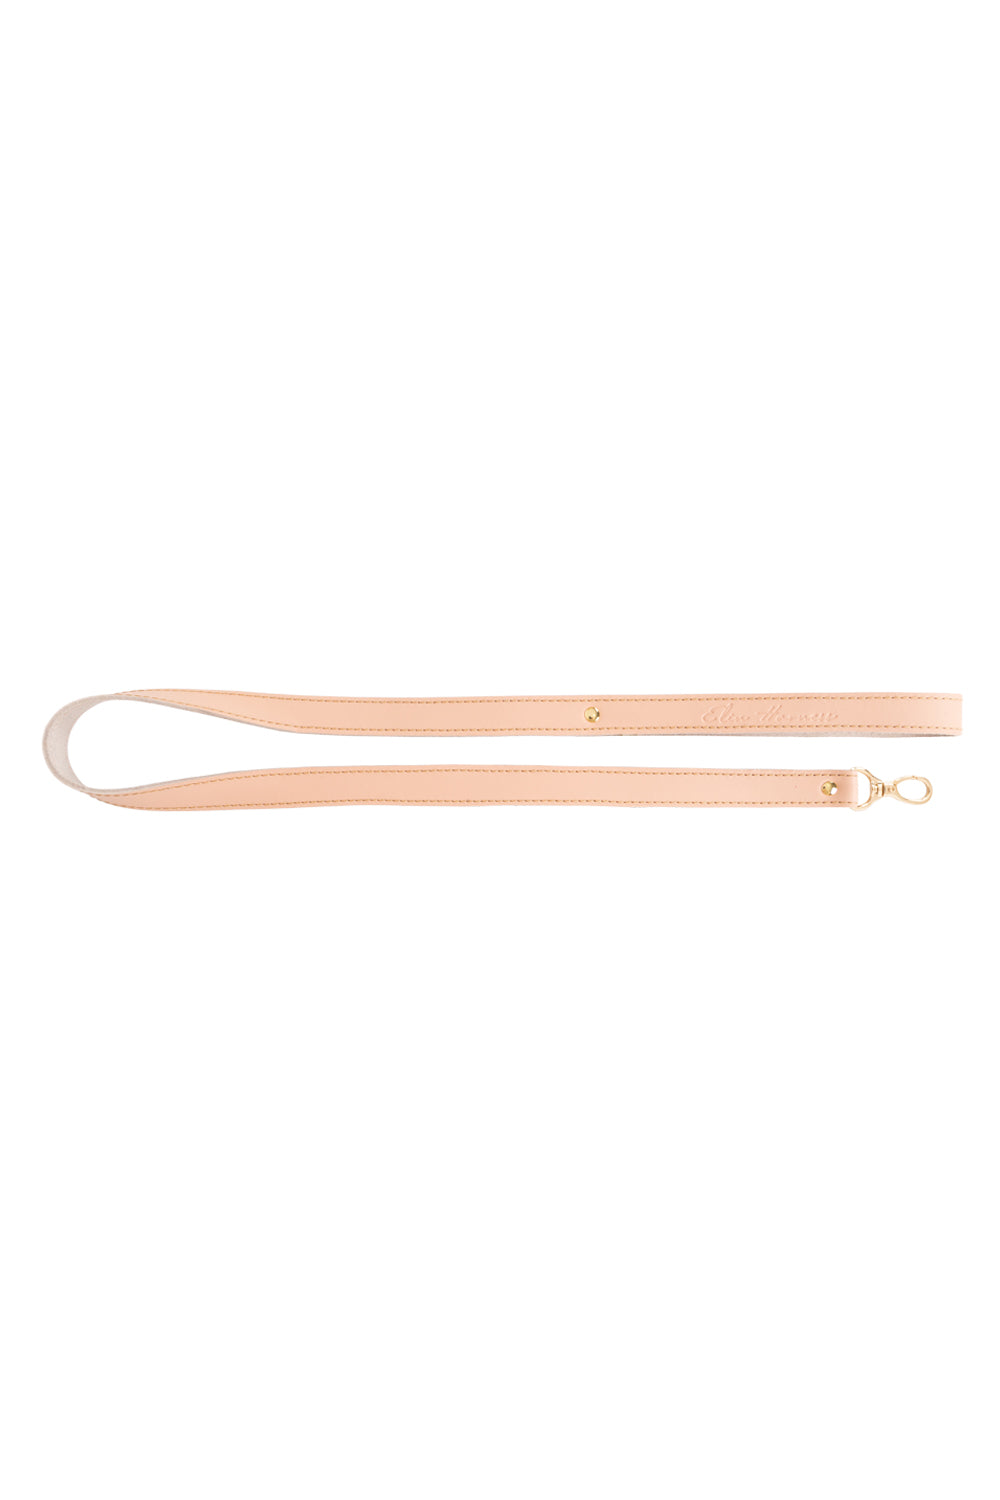 Leather leash. Pink